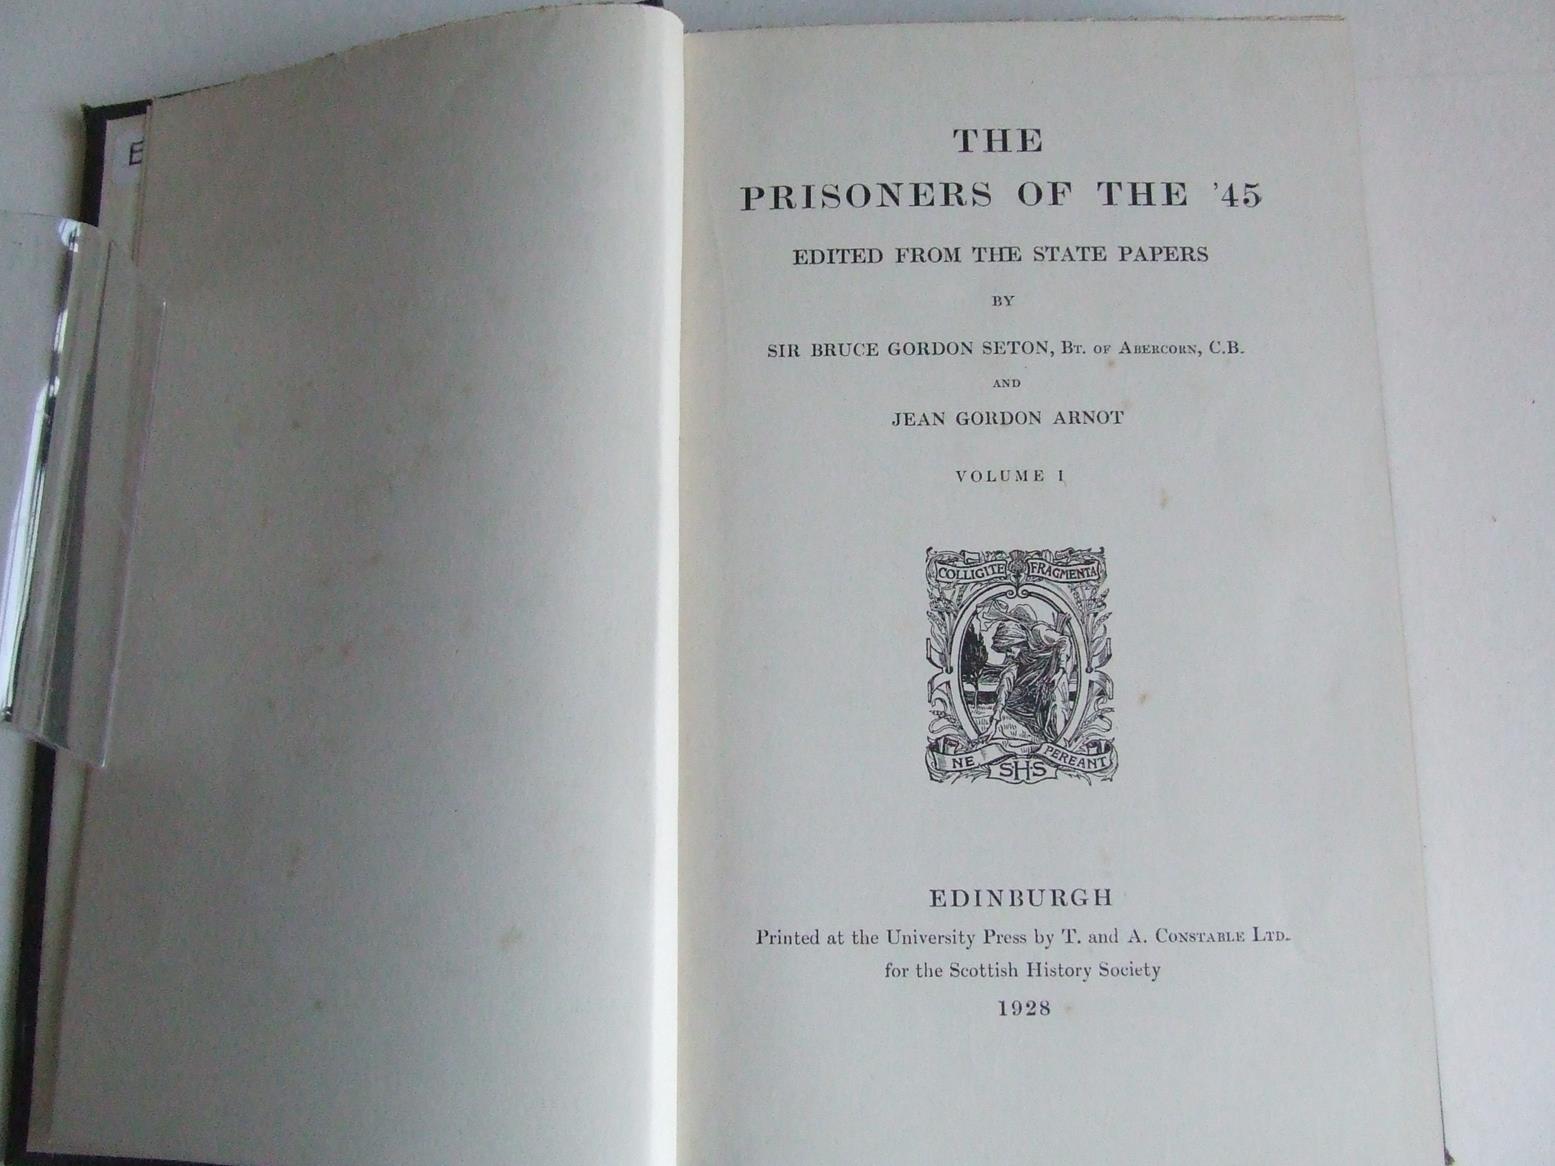 The Prisoners of the '45. edited from the state papers.